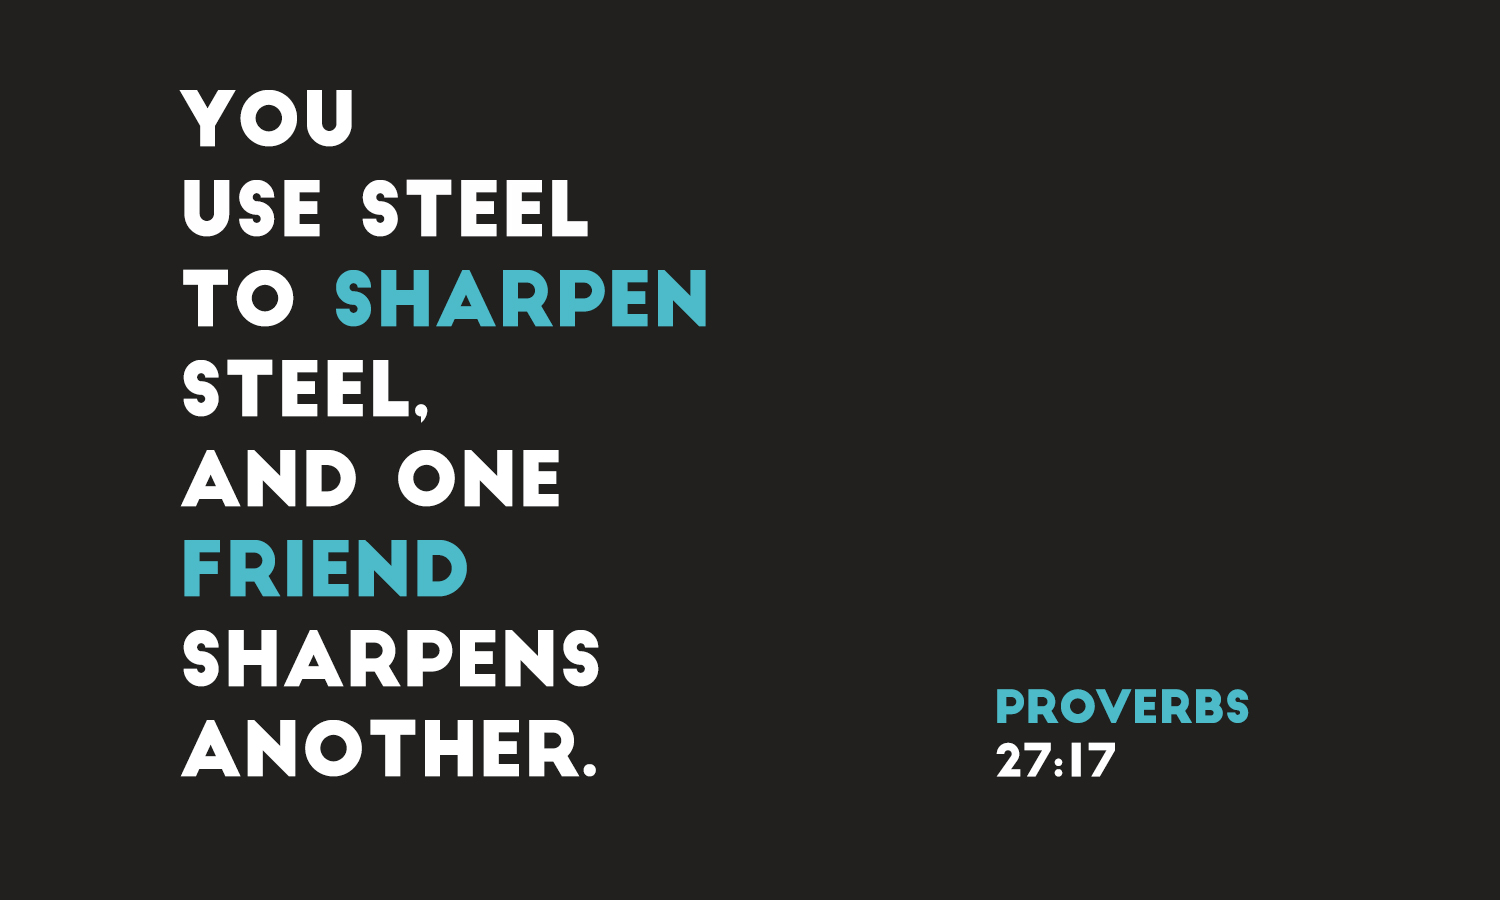 Proverbs 27:17 You use steel to sharpen steel, and one friend sharpens another.